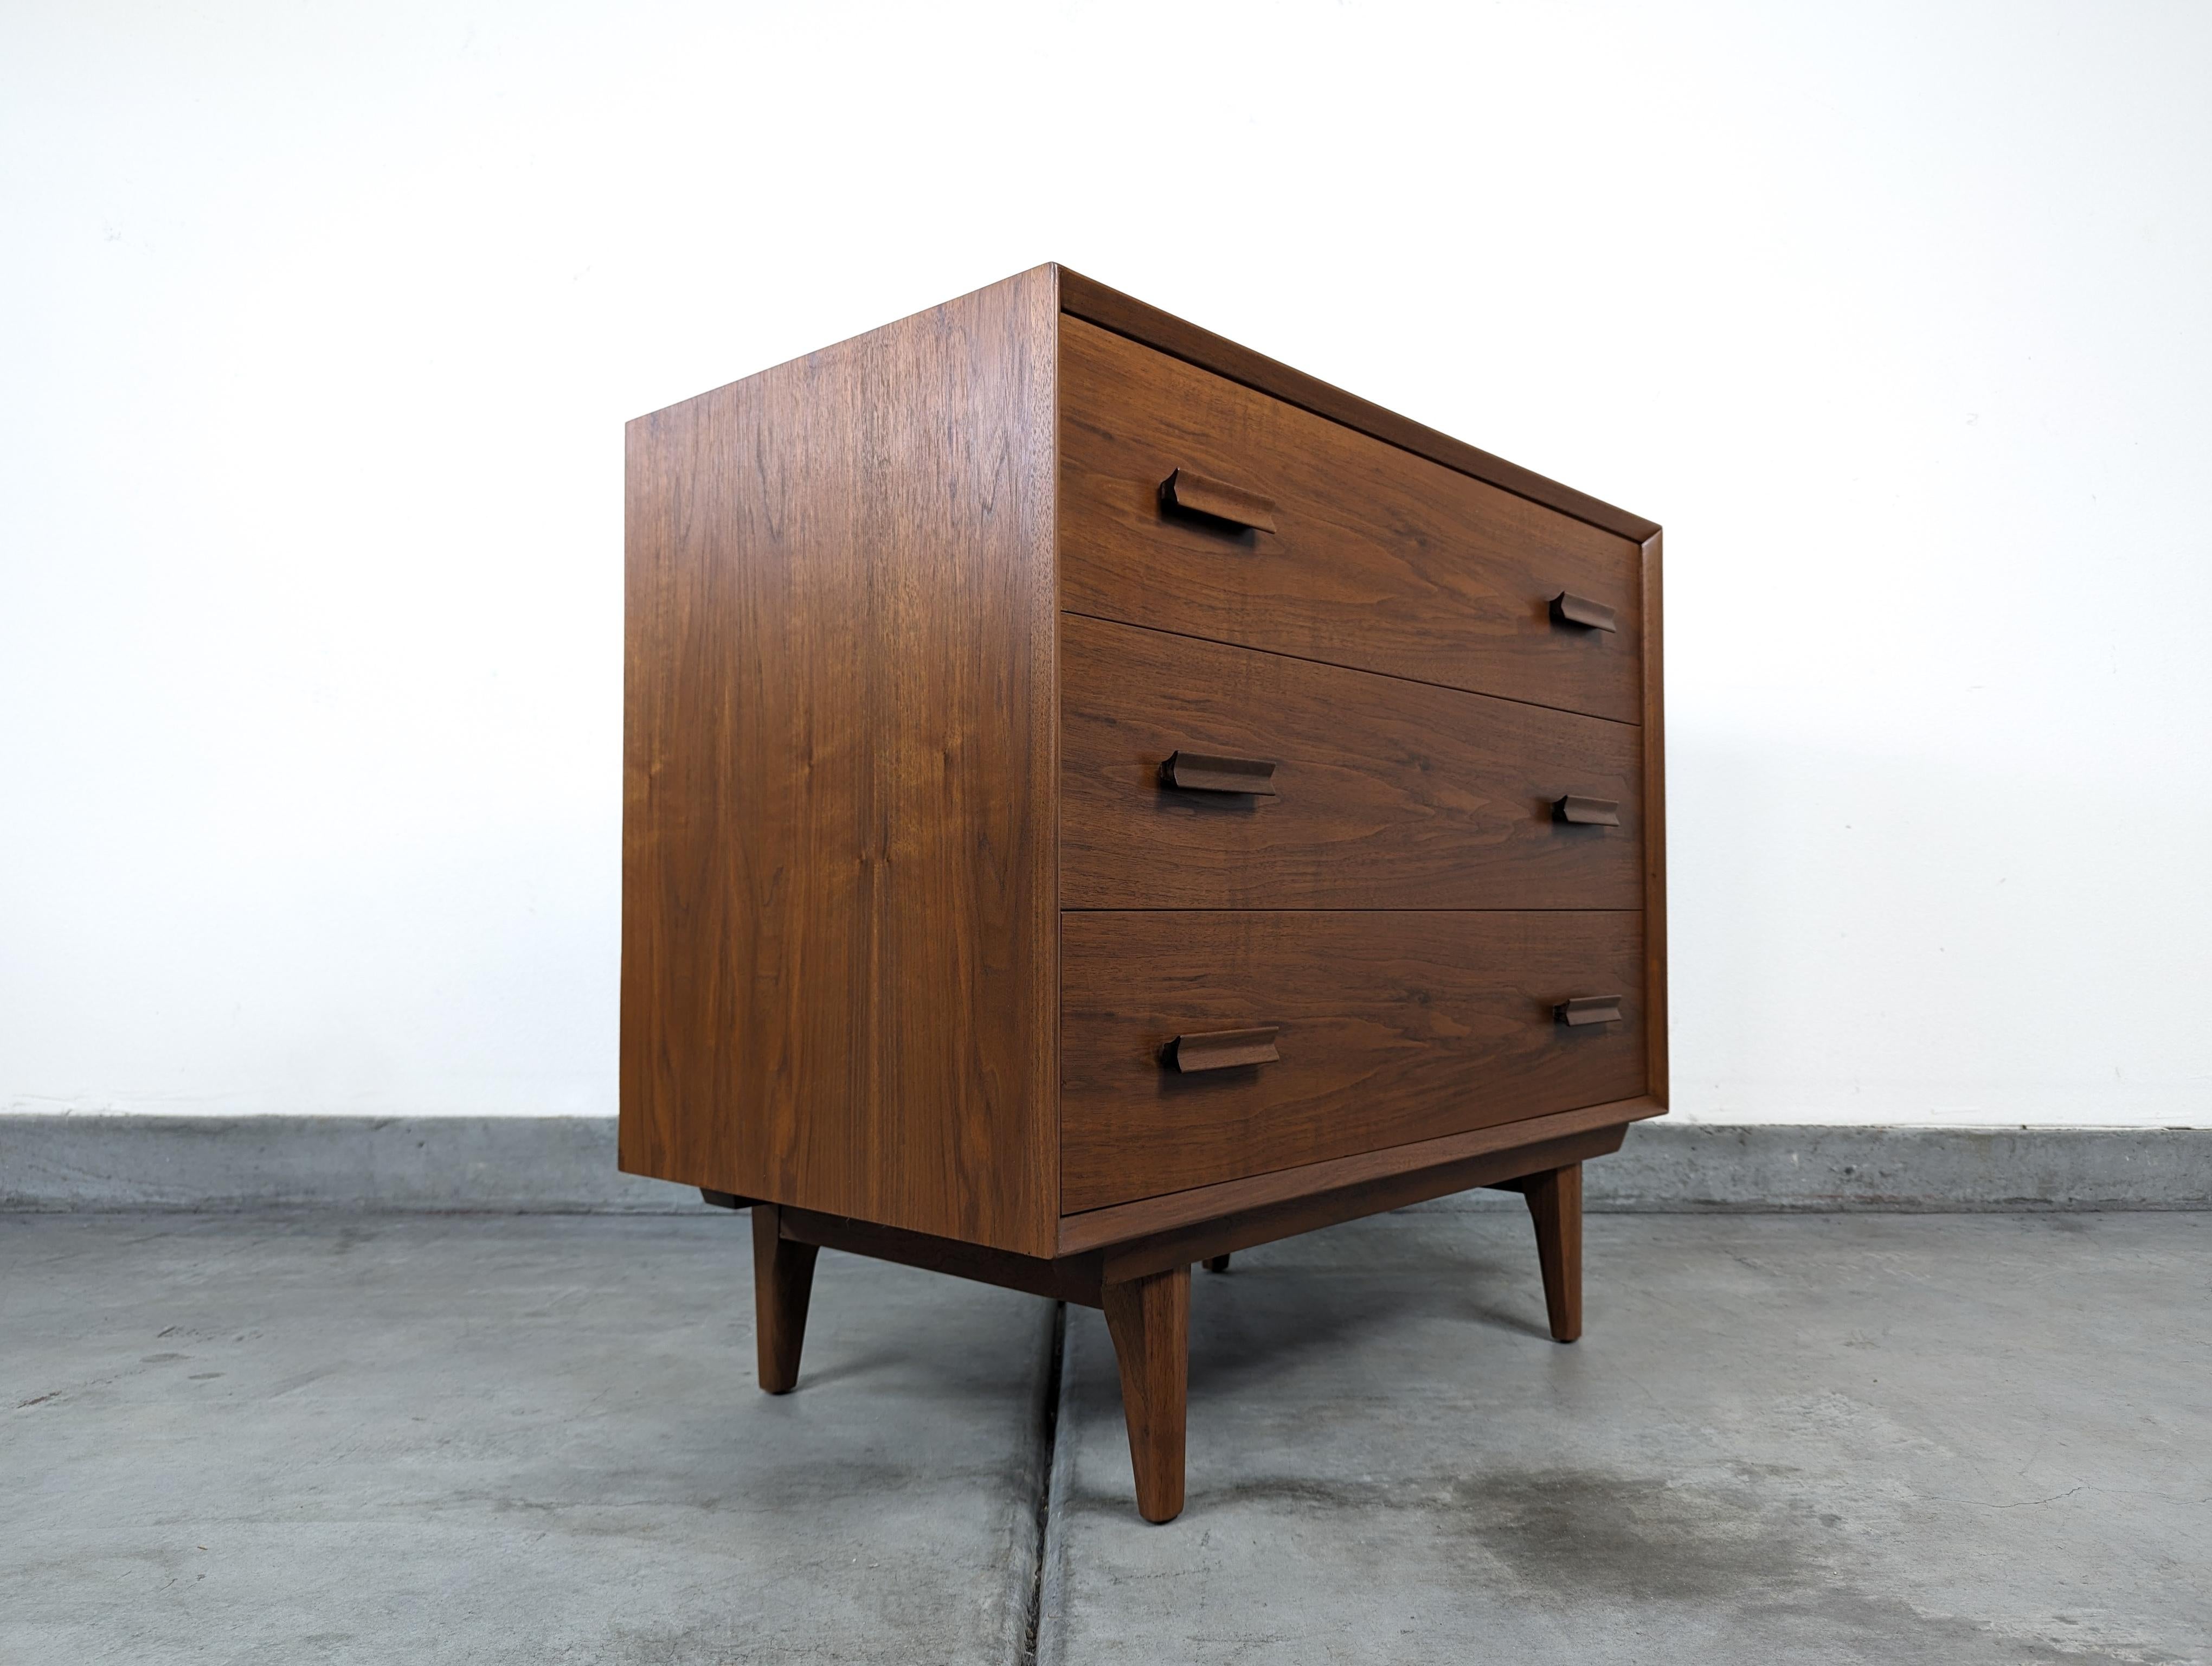 Discover the impeccable craftsmanship and timeless elegance of Scandinavian design with this exquisite vintage Mid-Century Modern walnut chest of drawers from the 1960s. Although its precise origins remain unknown, the essence of Nordic style is